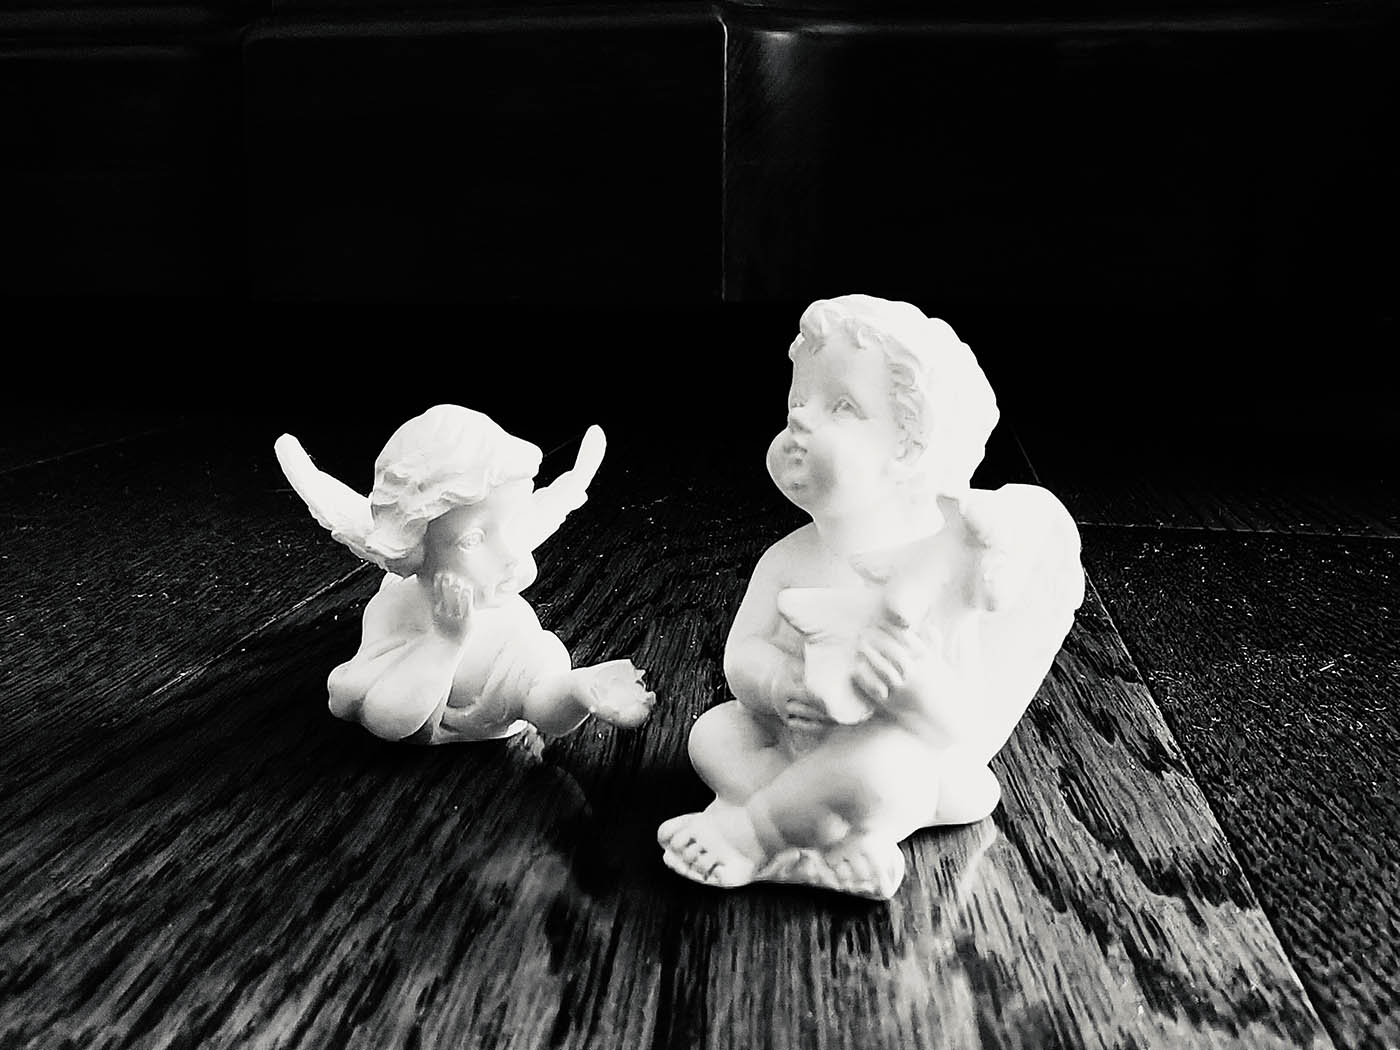 Black and white photo of two classical type sculptures of cherubs.